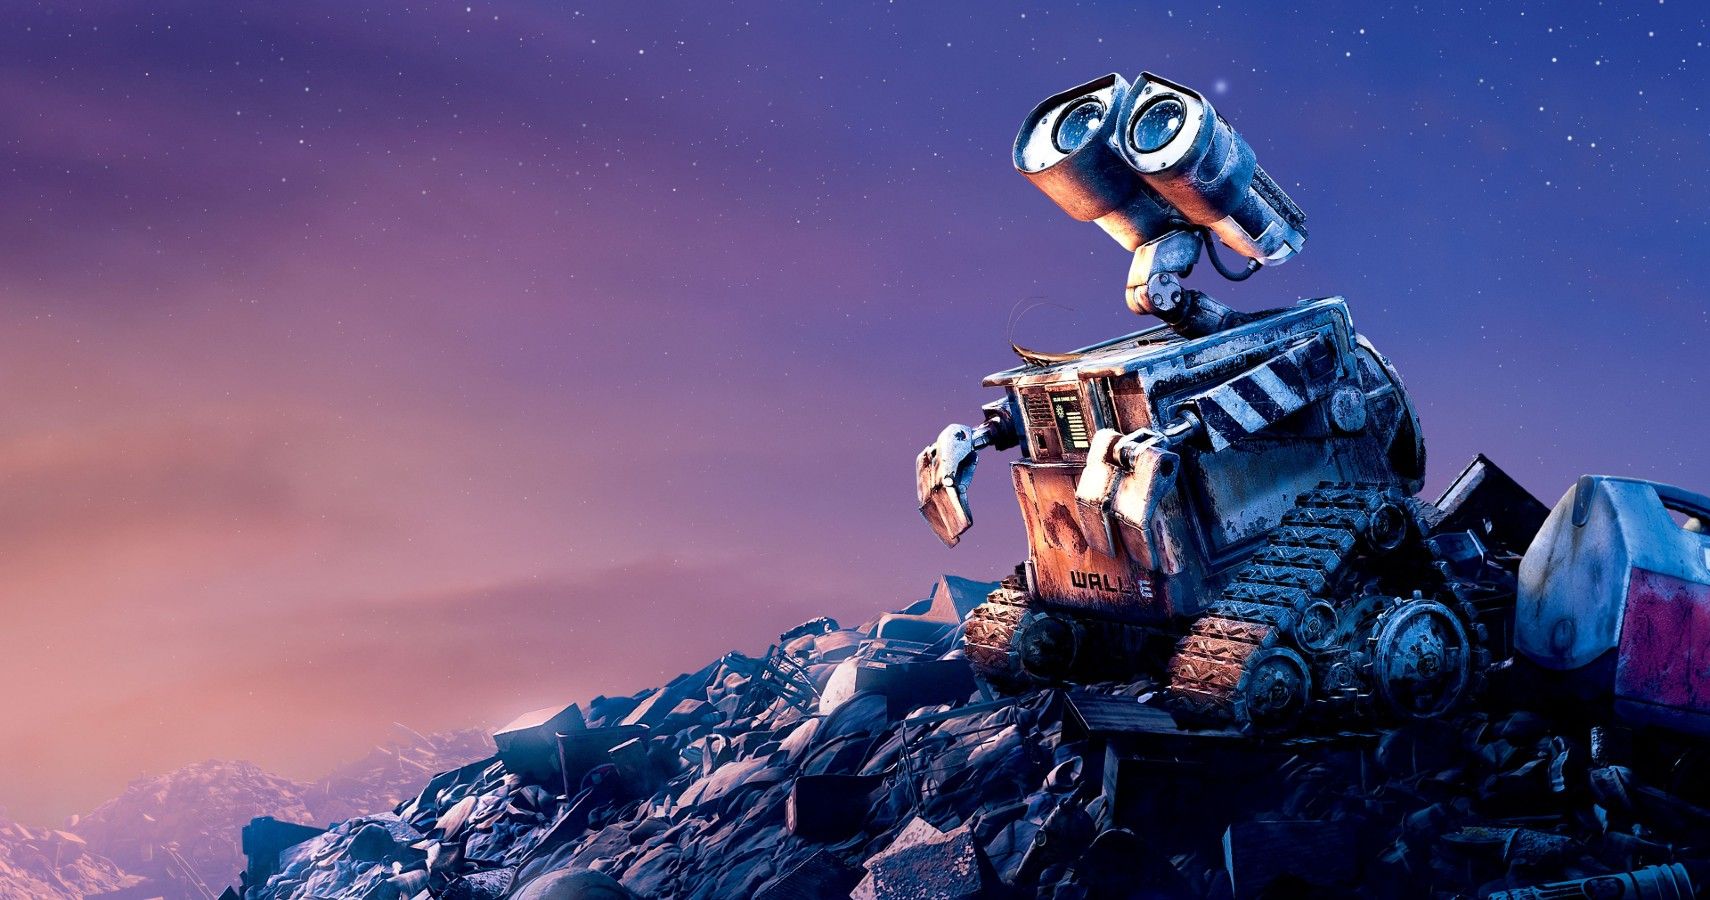 Pixar's Wall-E: 5 Of The Funniest Moments (& 5 Of The Saddest)